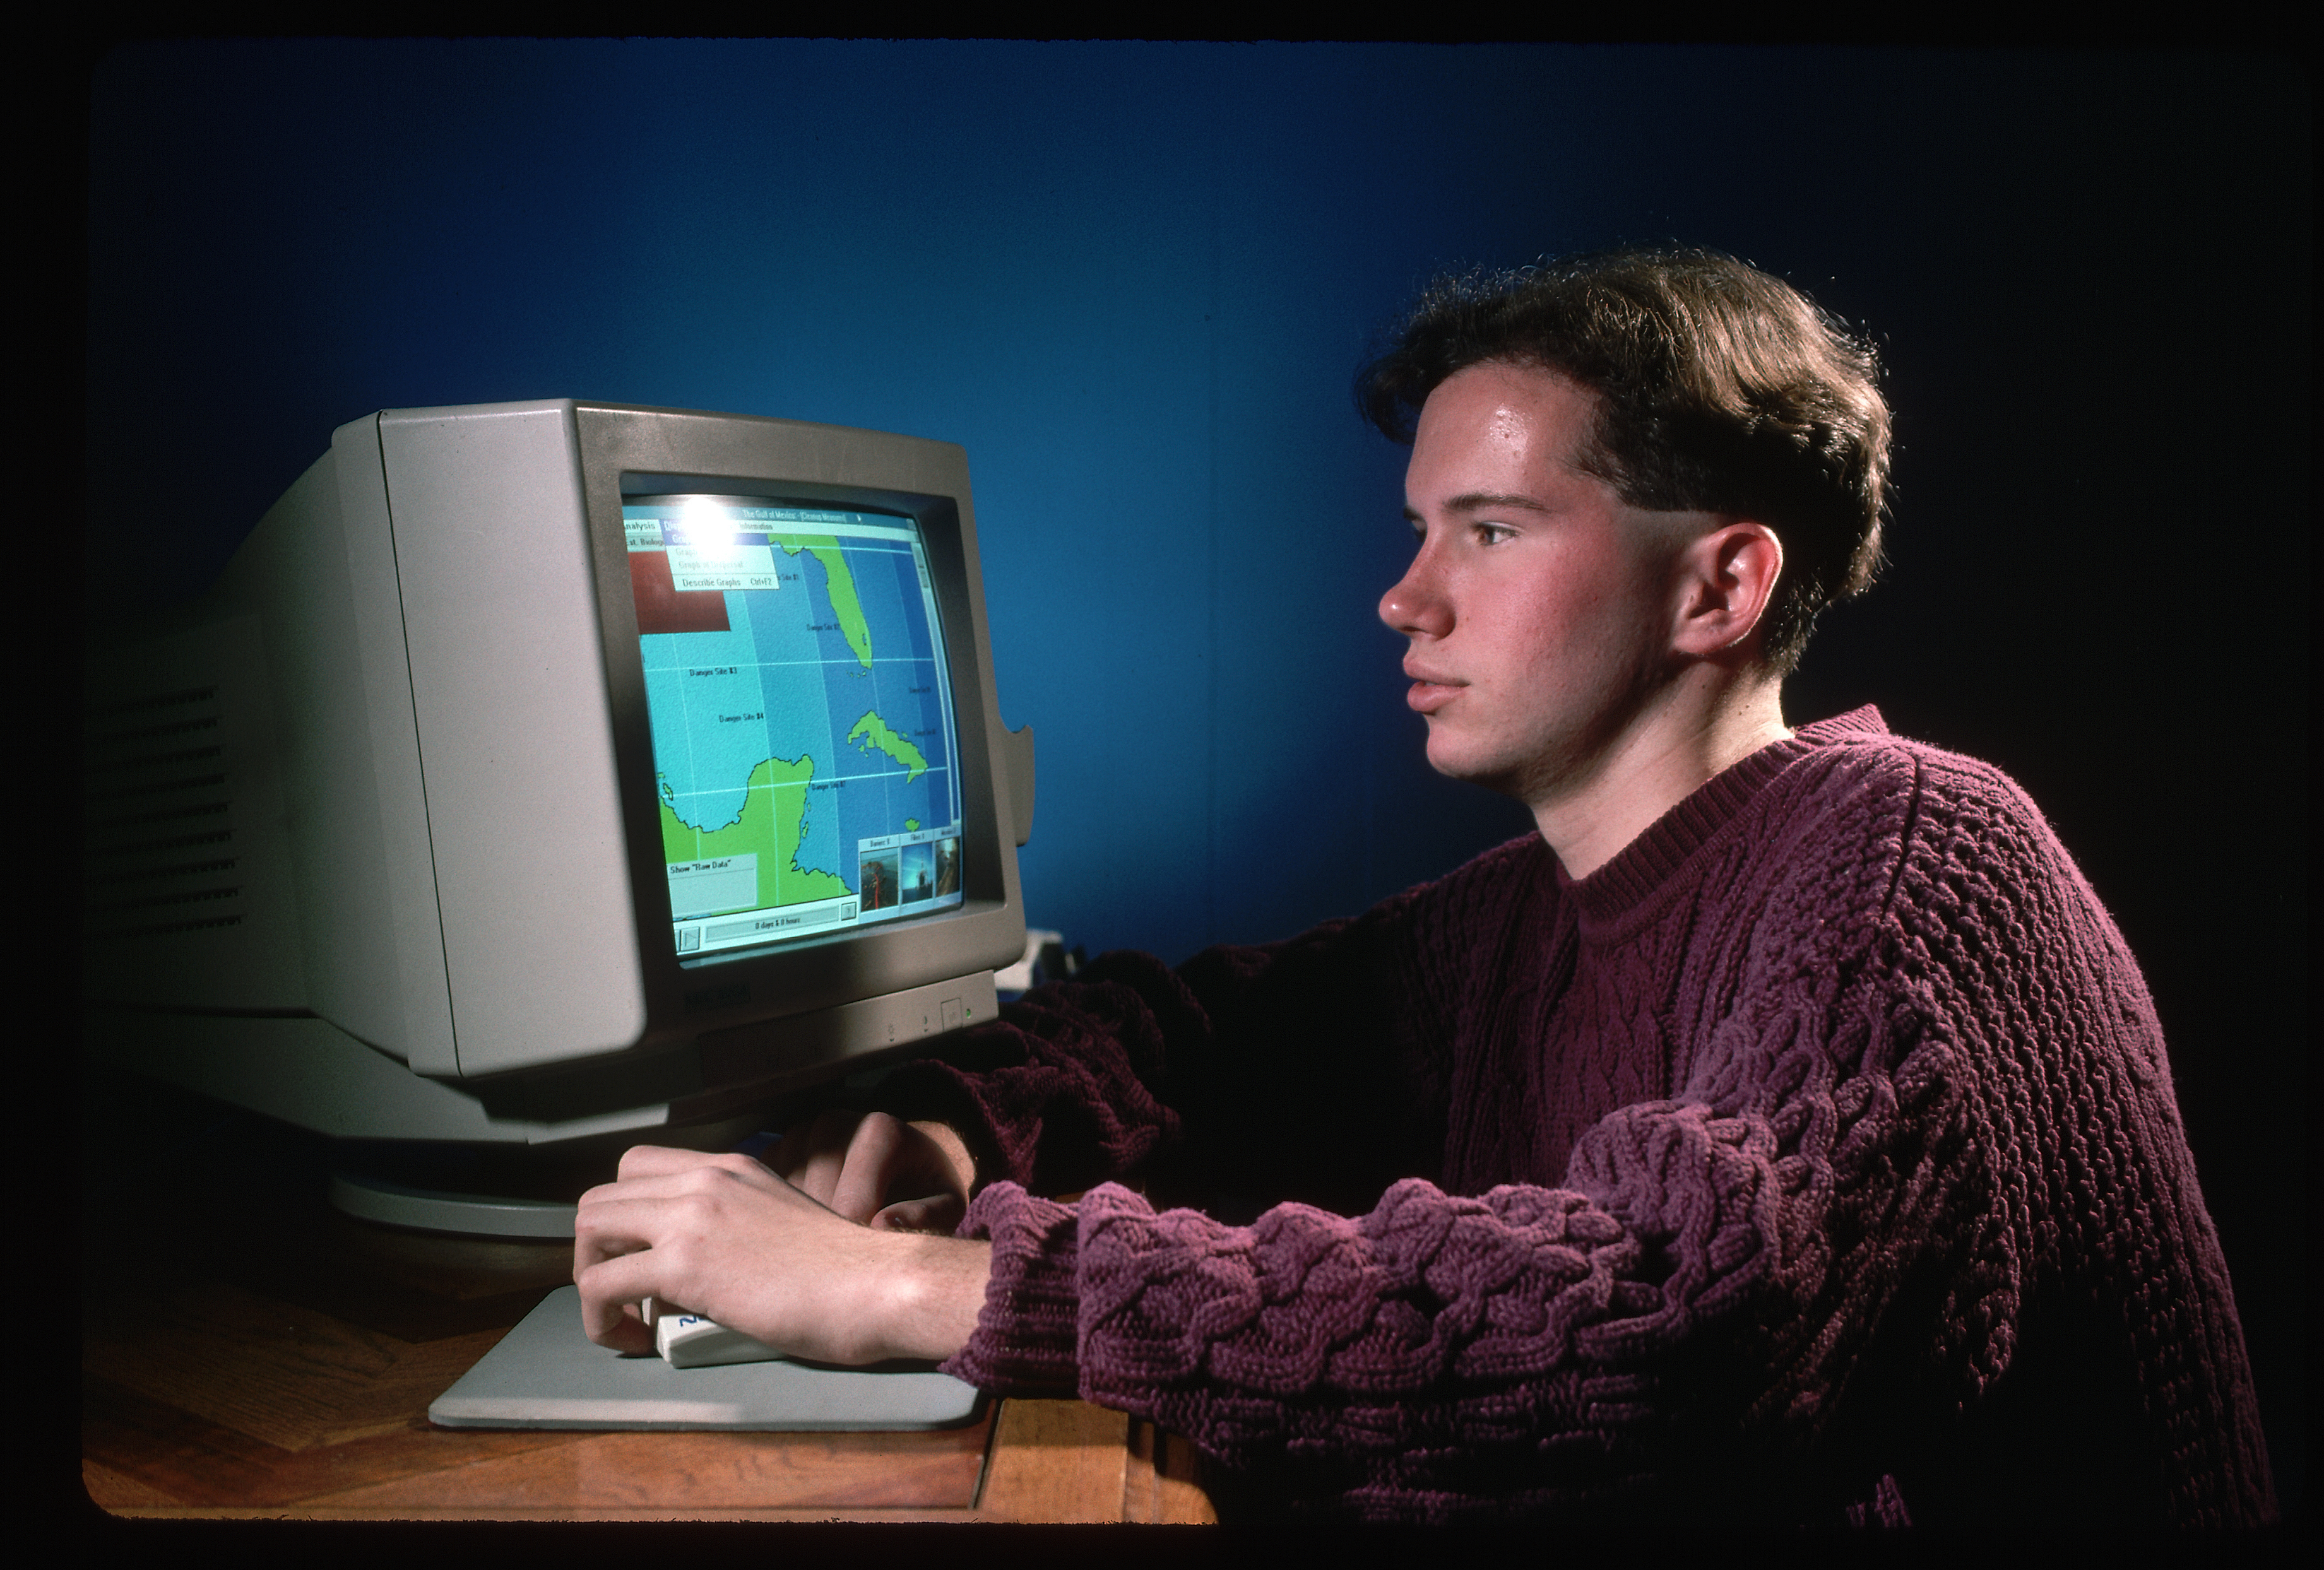 Person using an old computer with a map on the screen, wearing a sweater